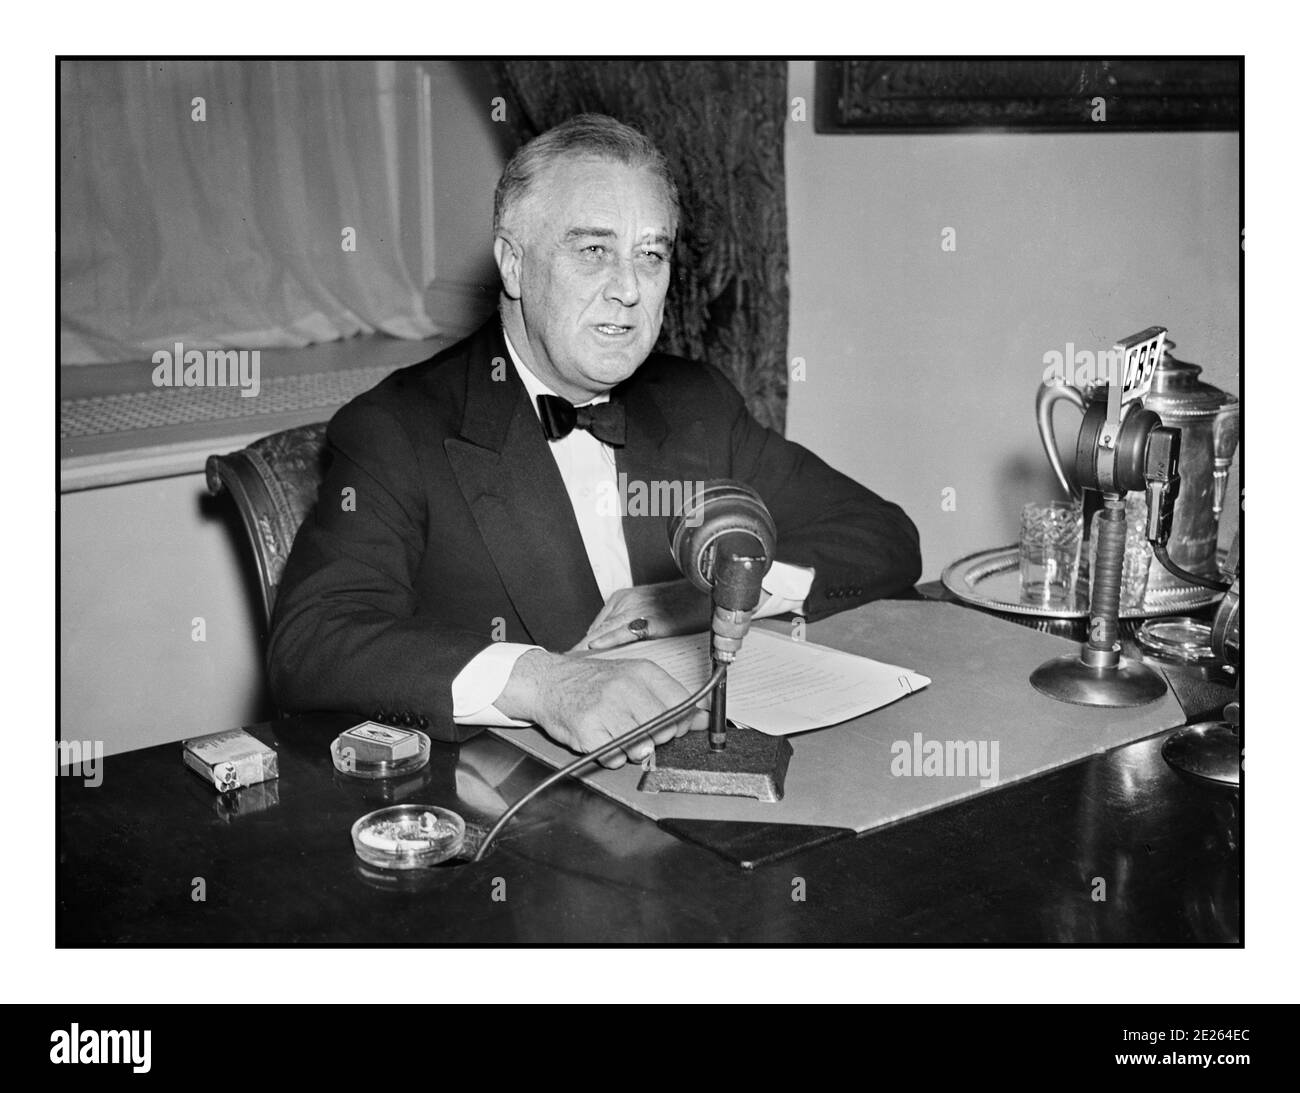 1930's FDR Franklin D. Roosevelt giving a radio broadcast (“fireside chat”) September 1934. On his desk CBS & NBC network broadcast microphones. Franklin Delano Roosevelt Sr., often referred to by his initials FDR, was an American statesman and political leader who served as the 32nd President of the United States from 1933 until his death in 1945. Stock Photo